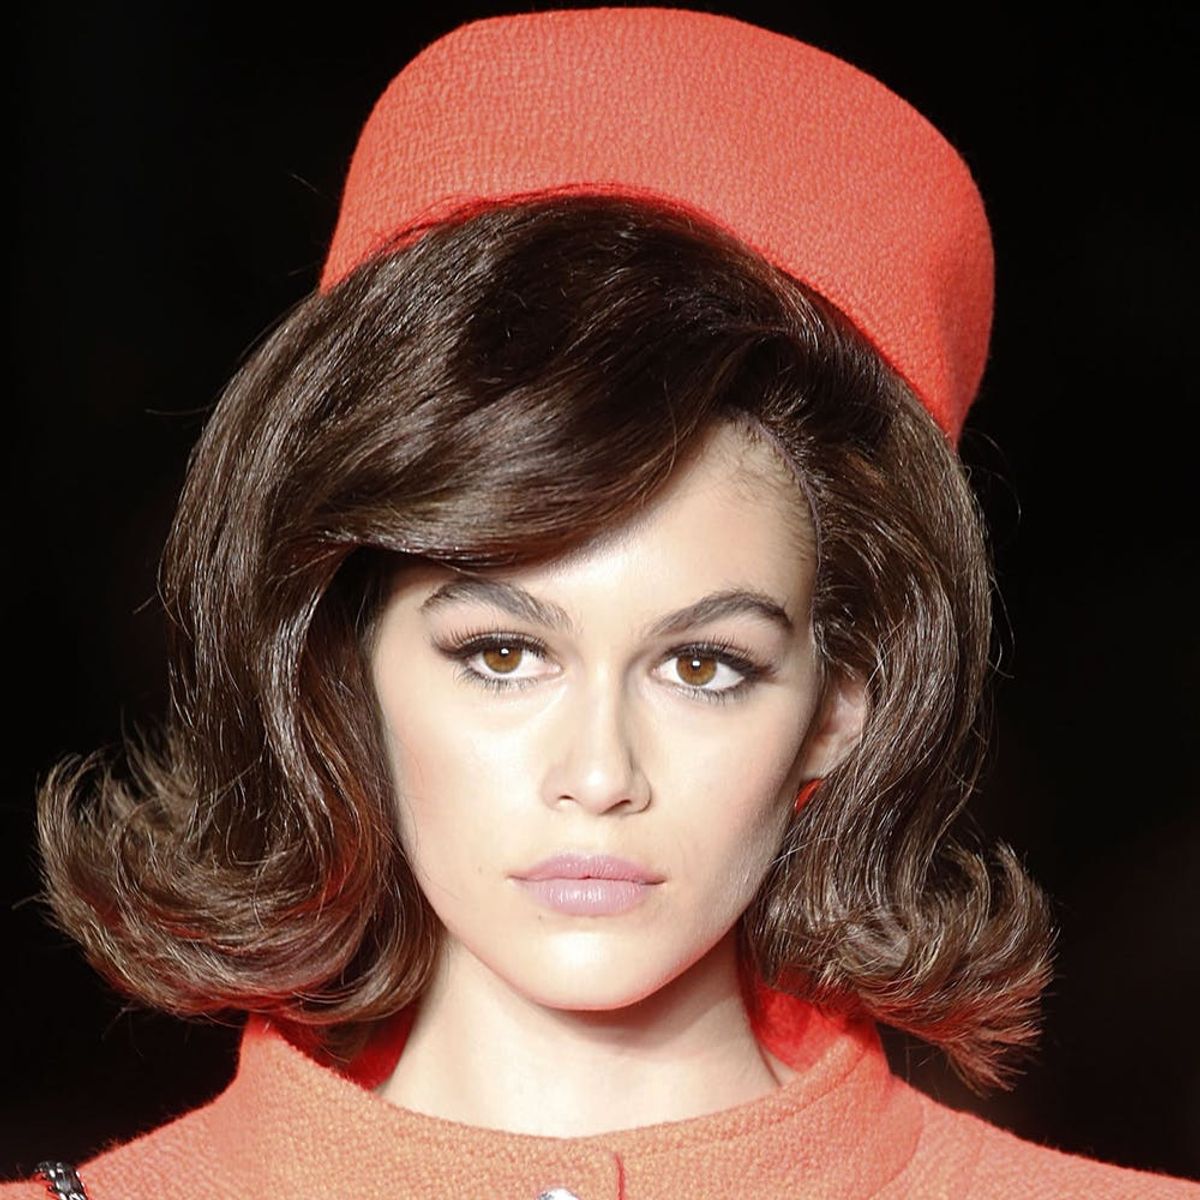 Kaia Gerber Has a *New* Lookalike in This ’60s Fashion Icon